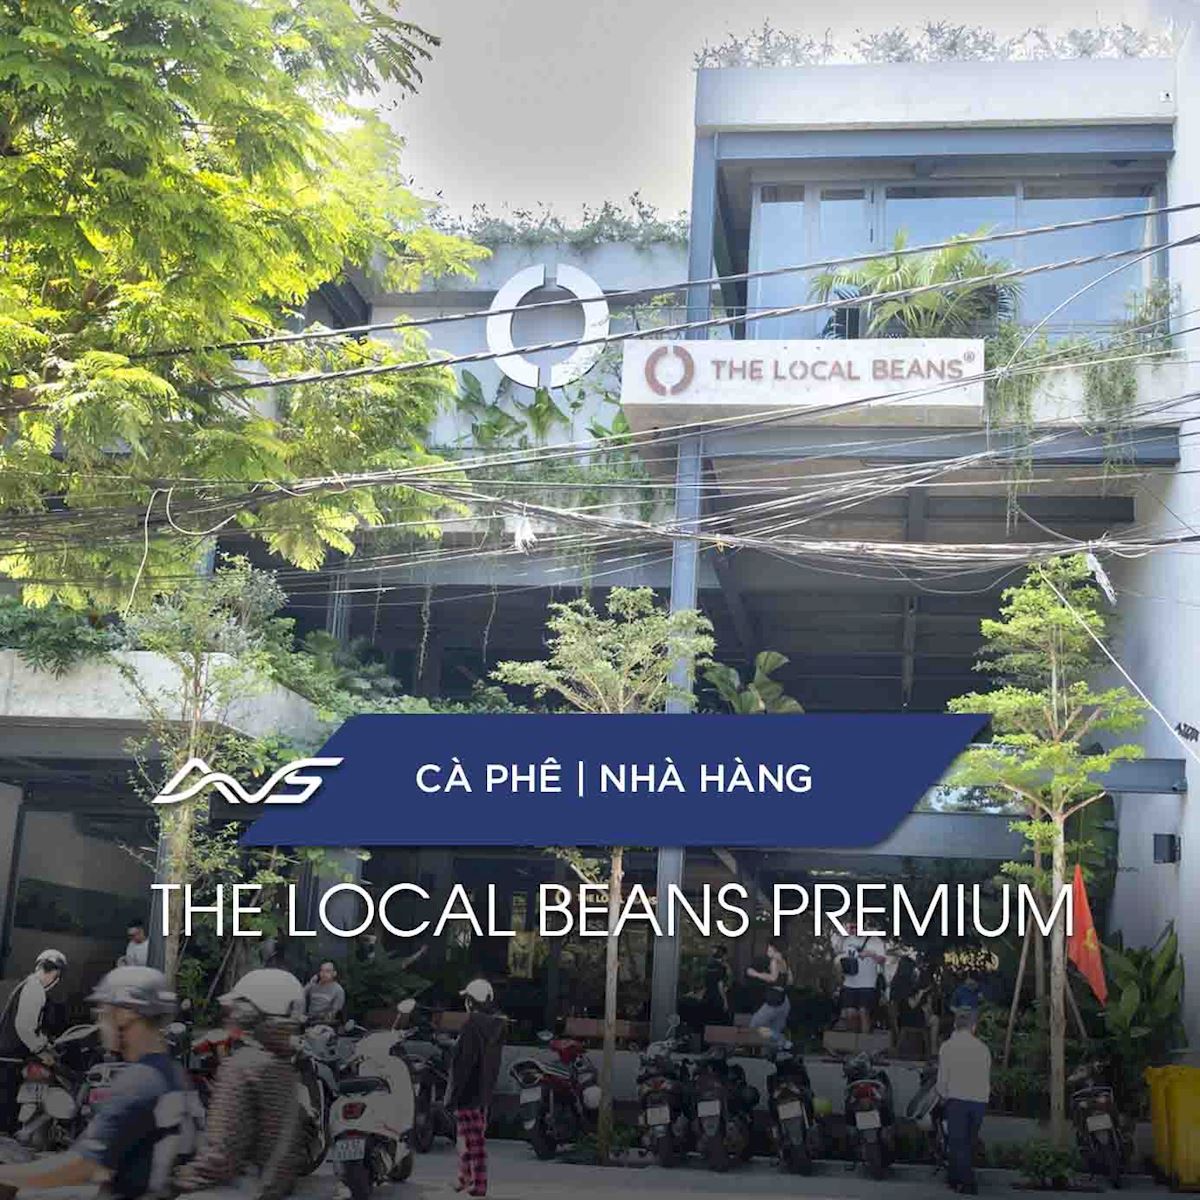 The-Local-Beans-Premium-He-Thong-am-Thanh-Background-Music-VS6-hinh-1